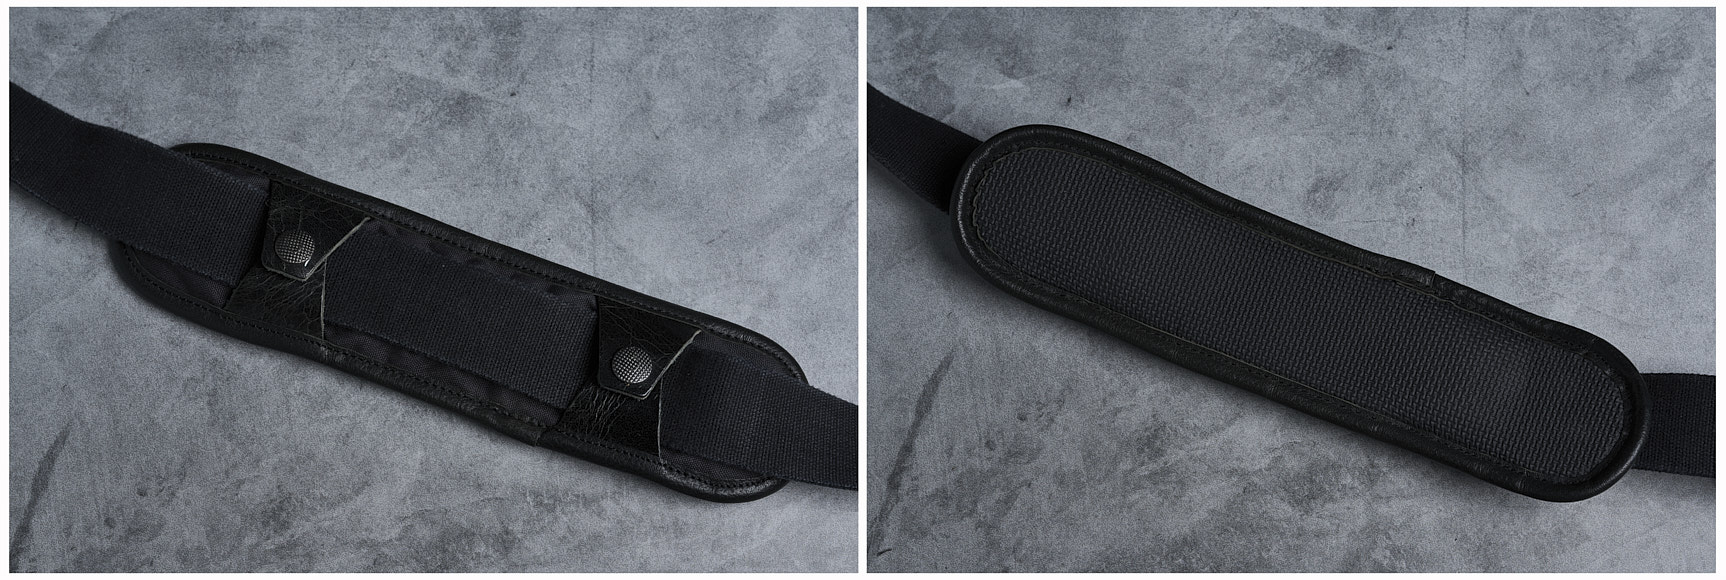 The strap has studs making it easy to remove or adjust when required. The neoprene padded design ensures that the padding grips your shoulder and doesn't slip.